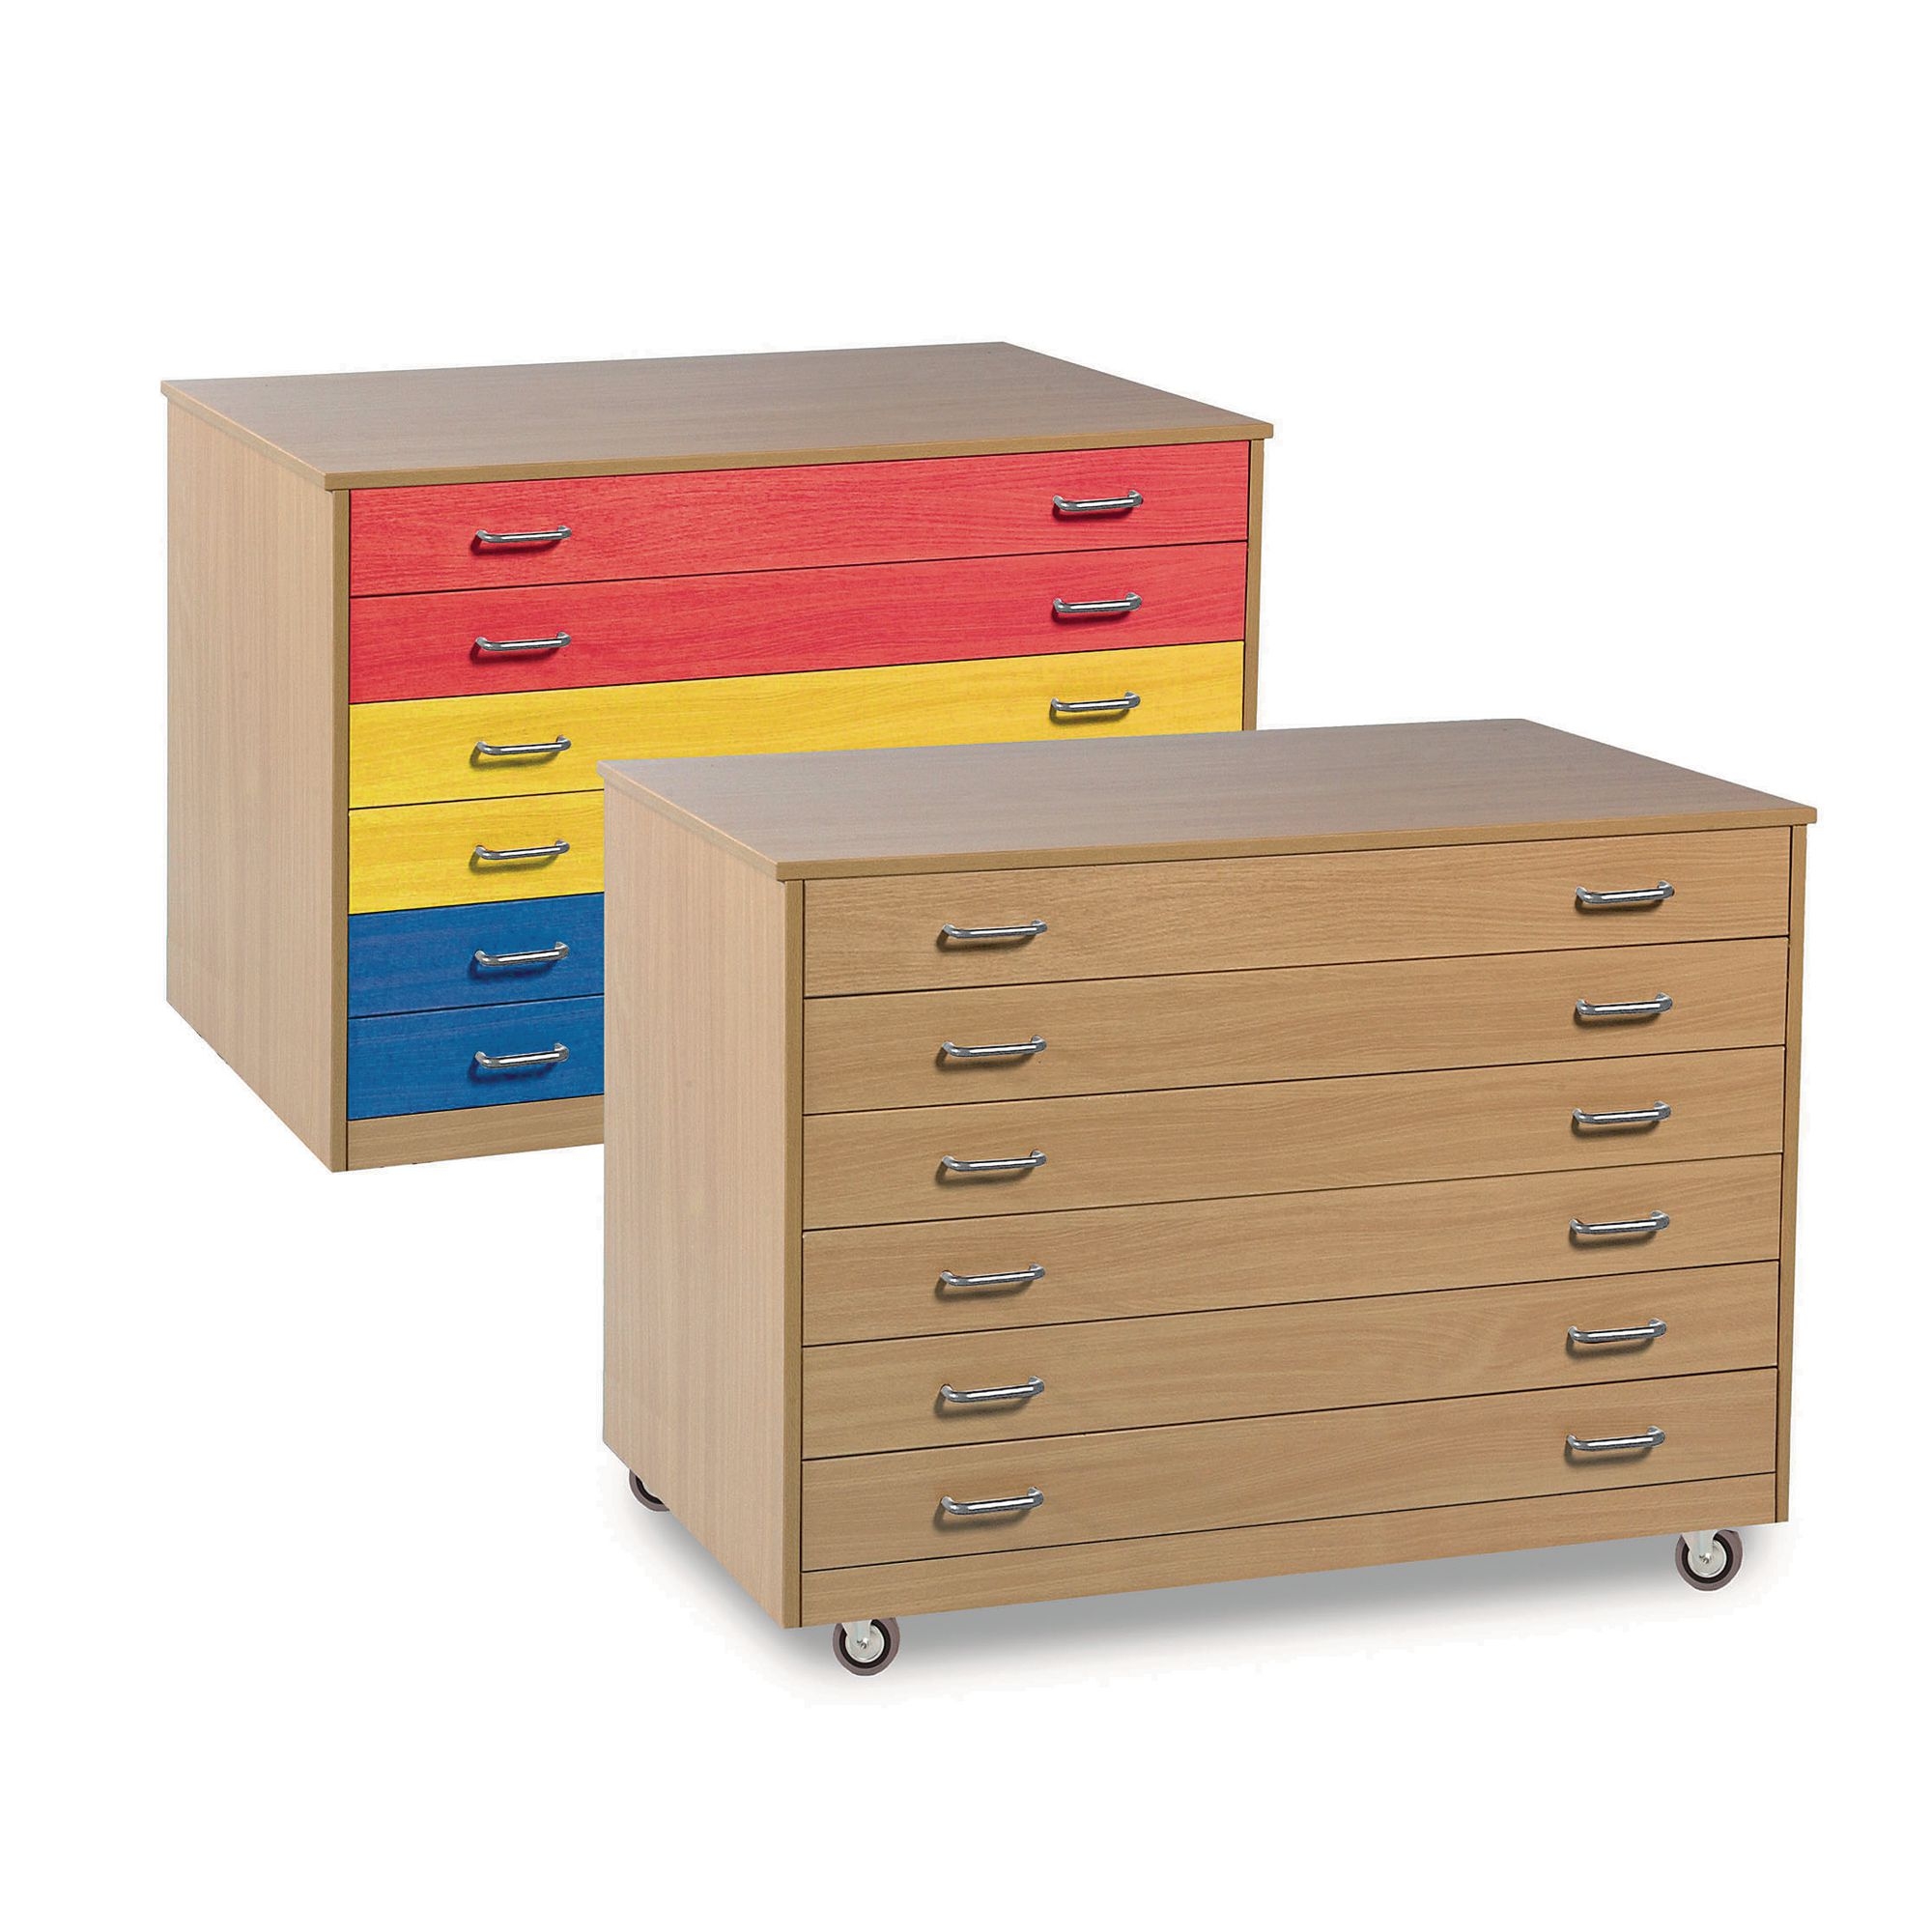 6 Drawer Plan Chest - Colour - Static